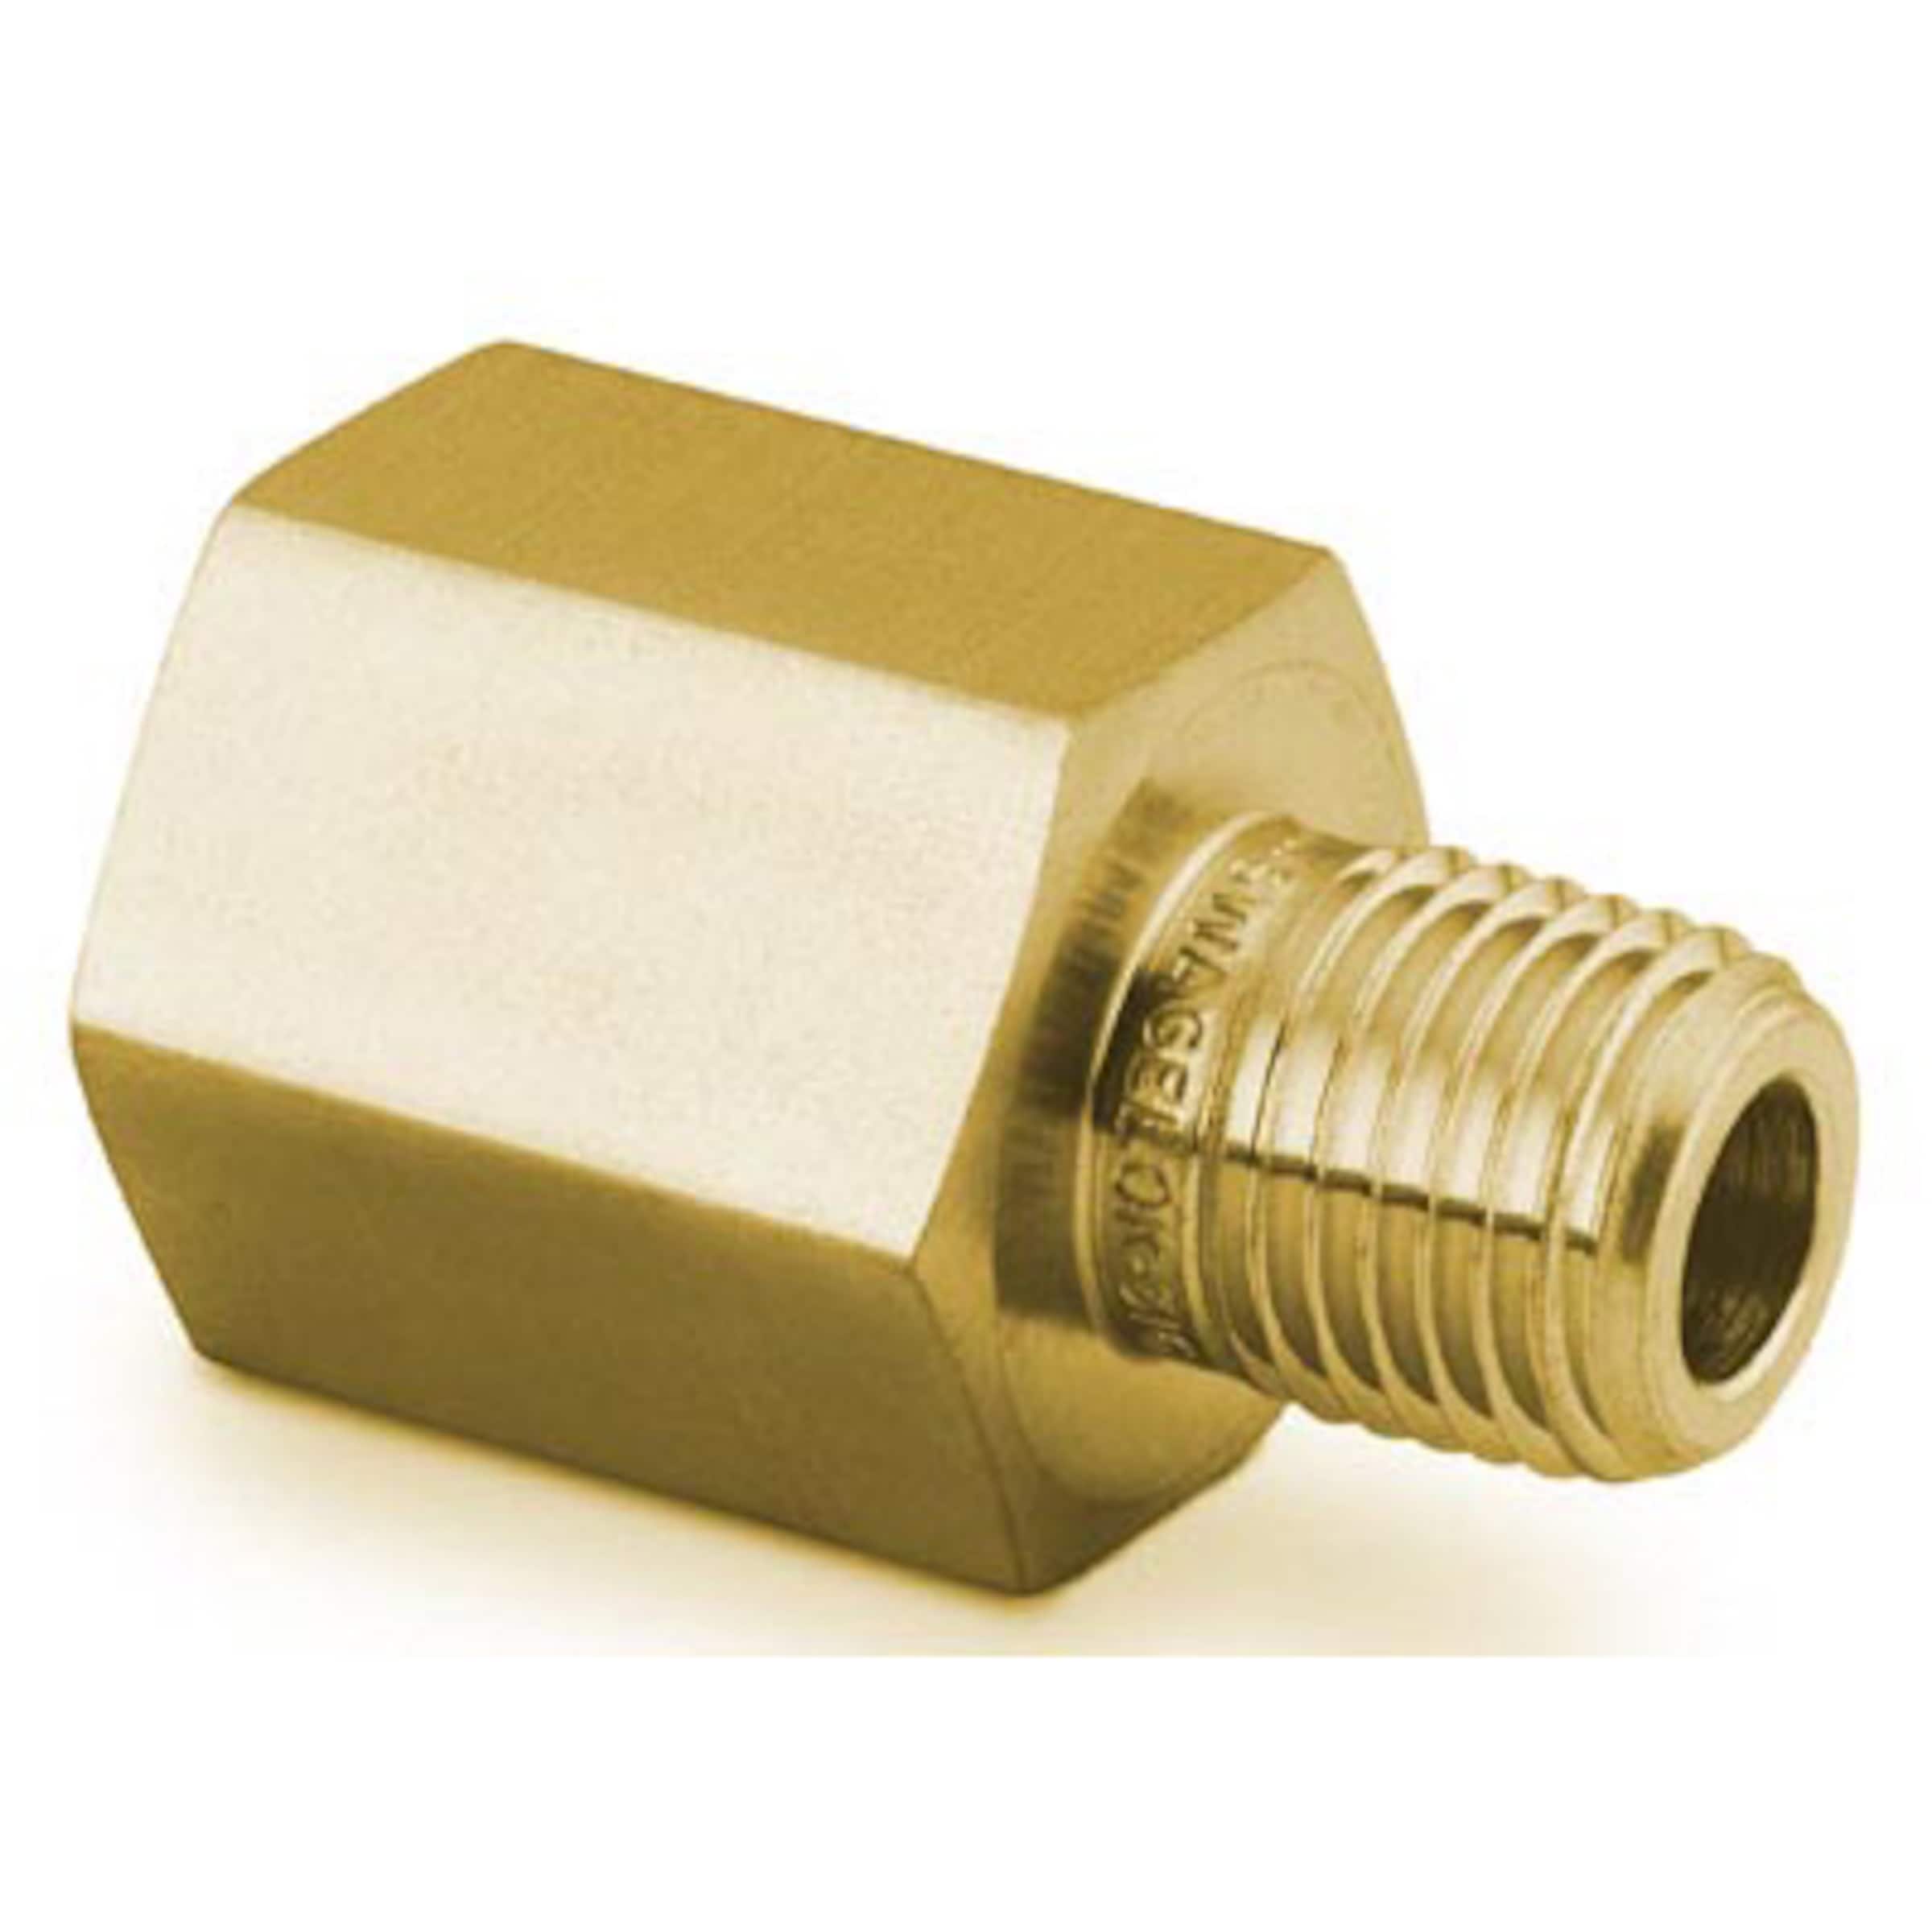 Brass Nozzle, 1/2 Inch (Inside Thread), ISI Approved